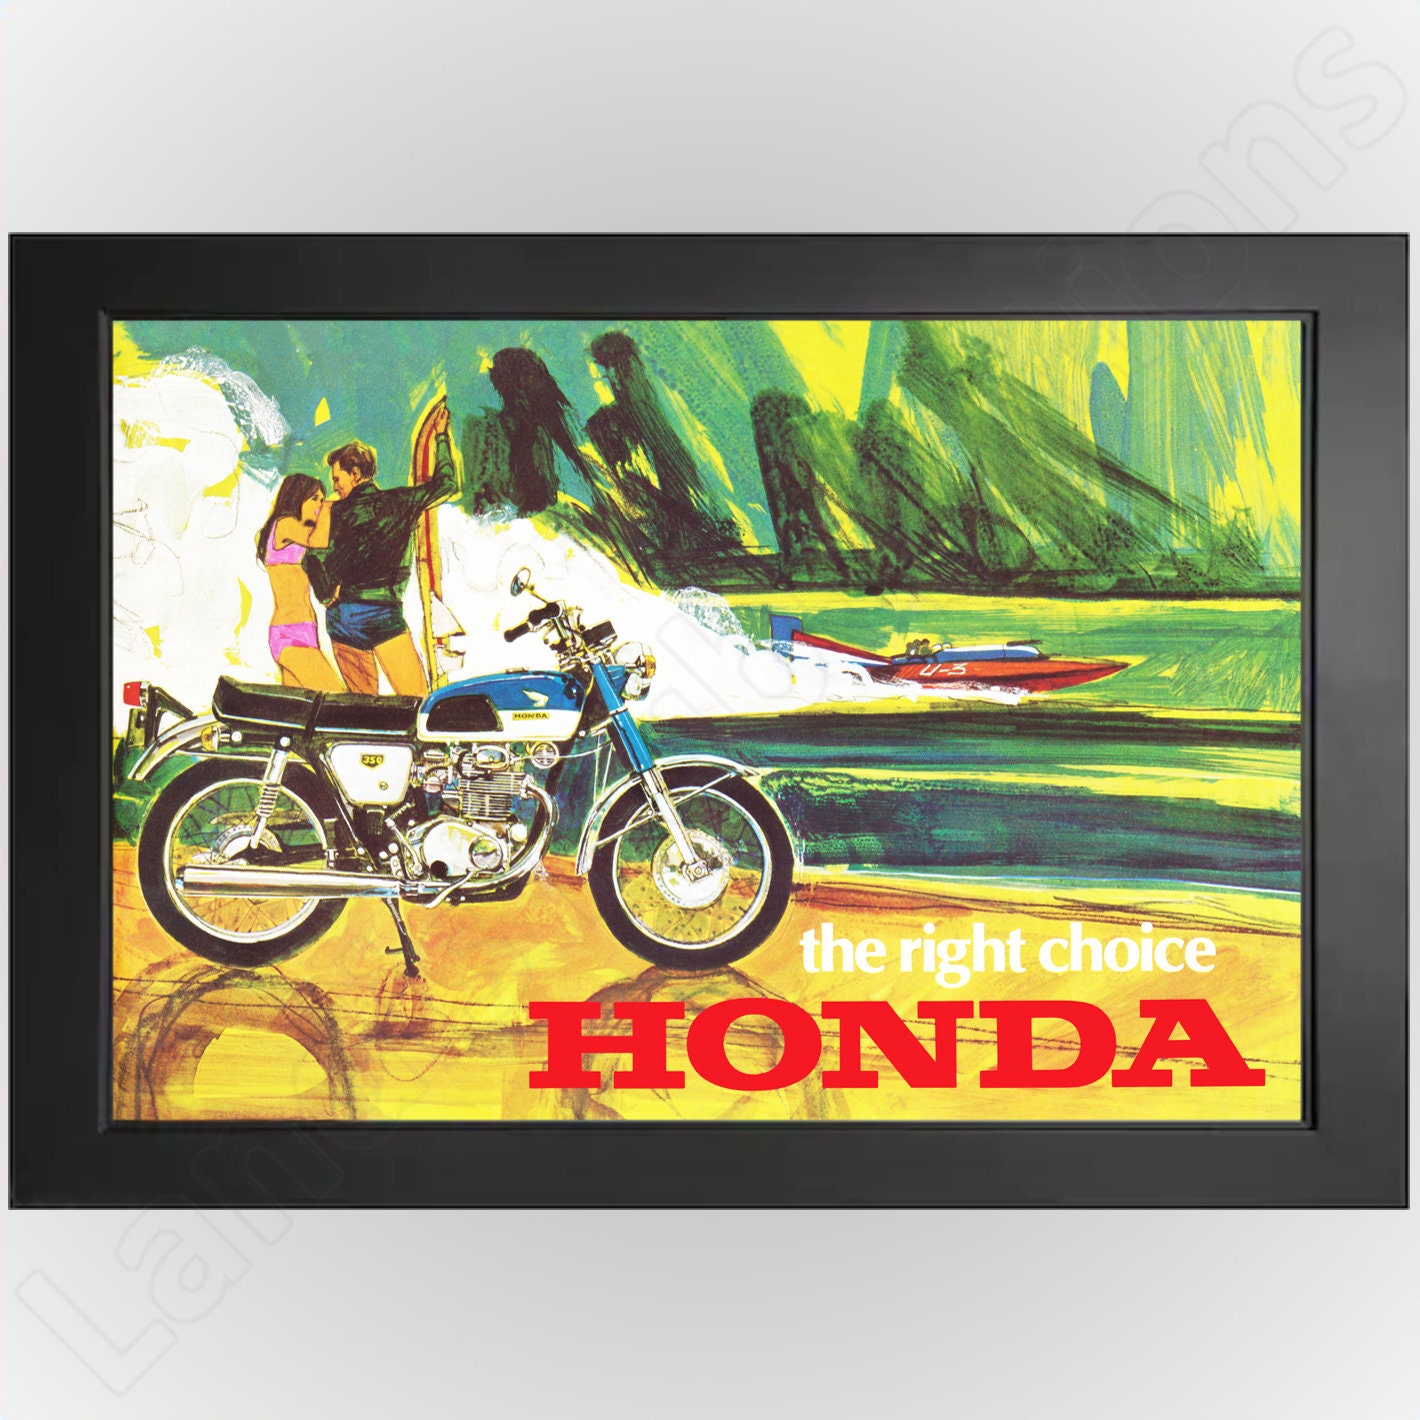 Yamaha R1 Luxury Motorcycle Speed Motorcycle Wall Art Home Decor - POSTER  20x30